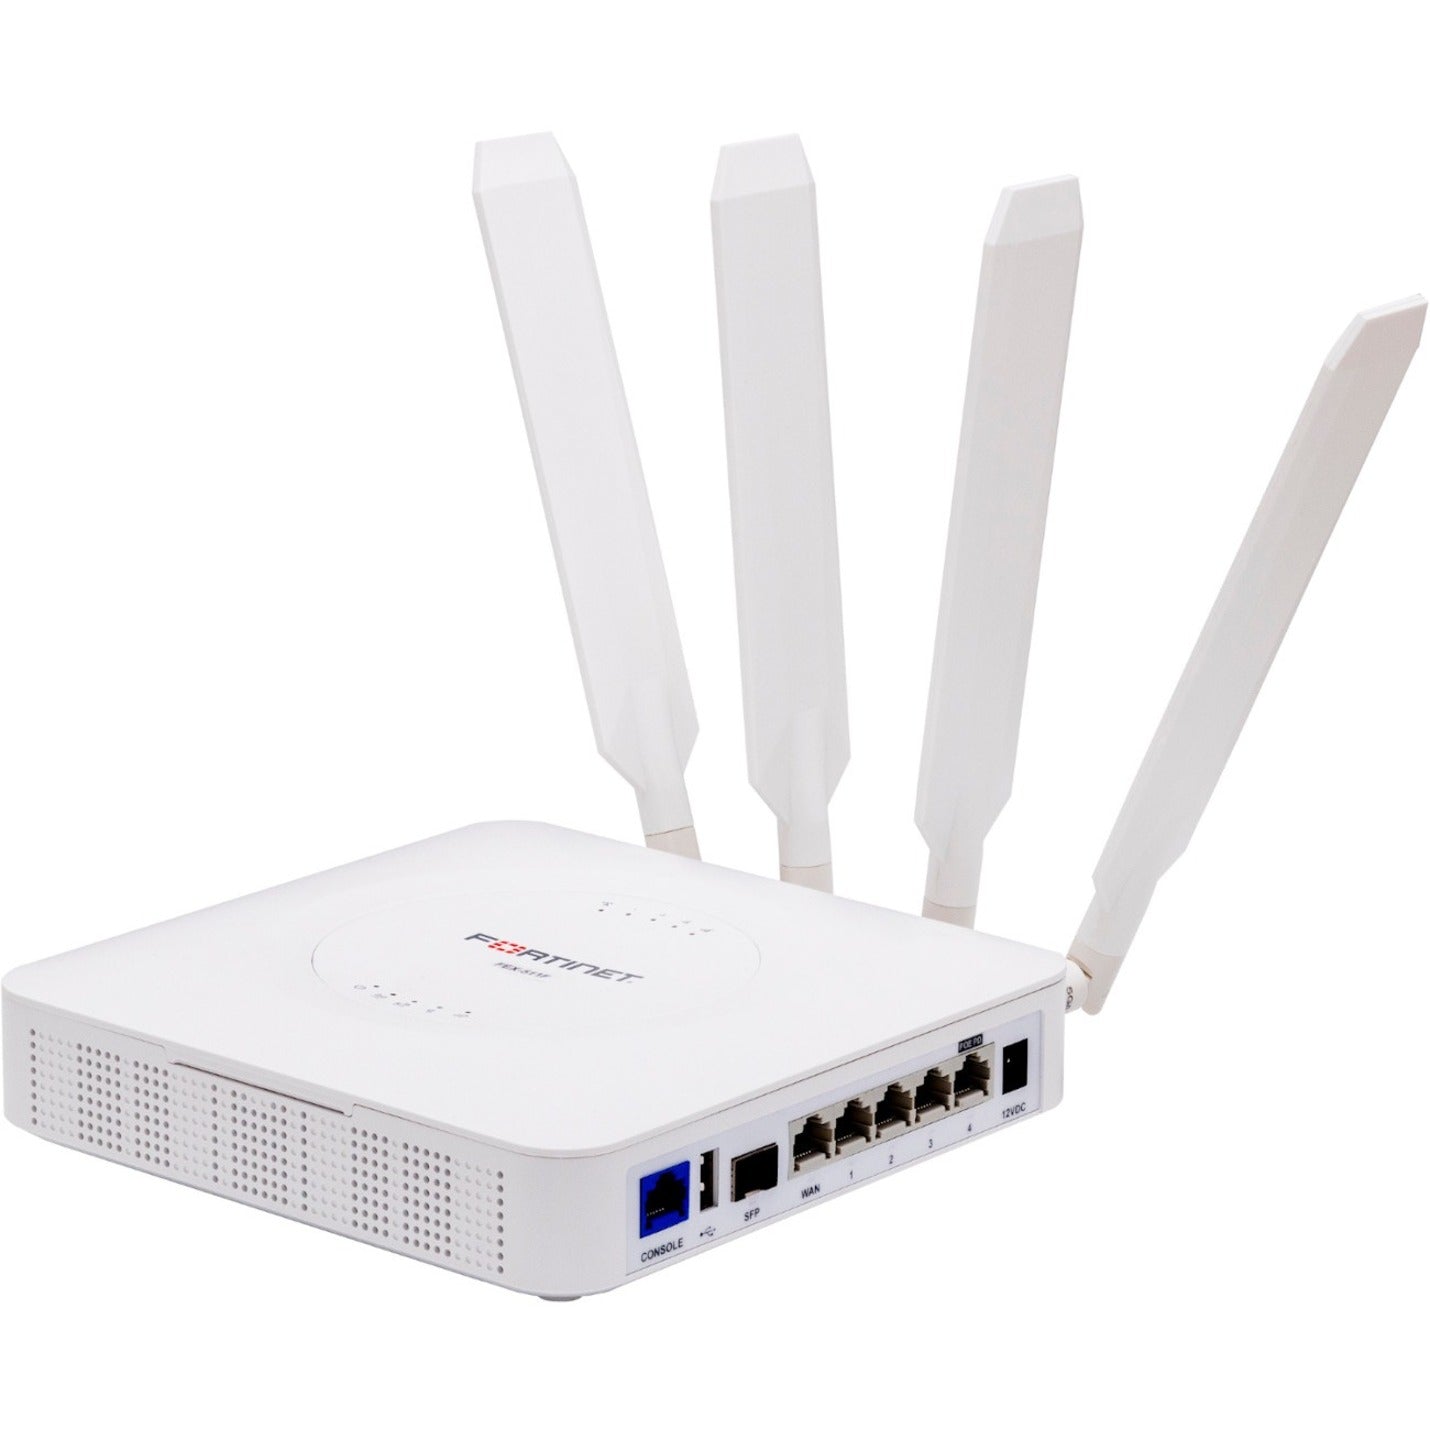 Fortinet FEX-511F FortiExtender Wireless Router, 5G Dual SIM Broadband Connectivity